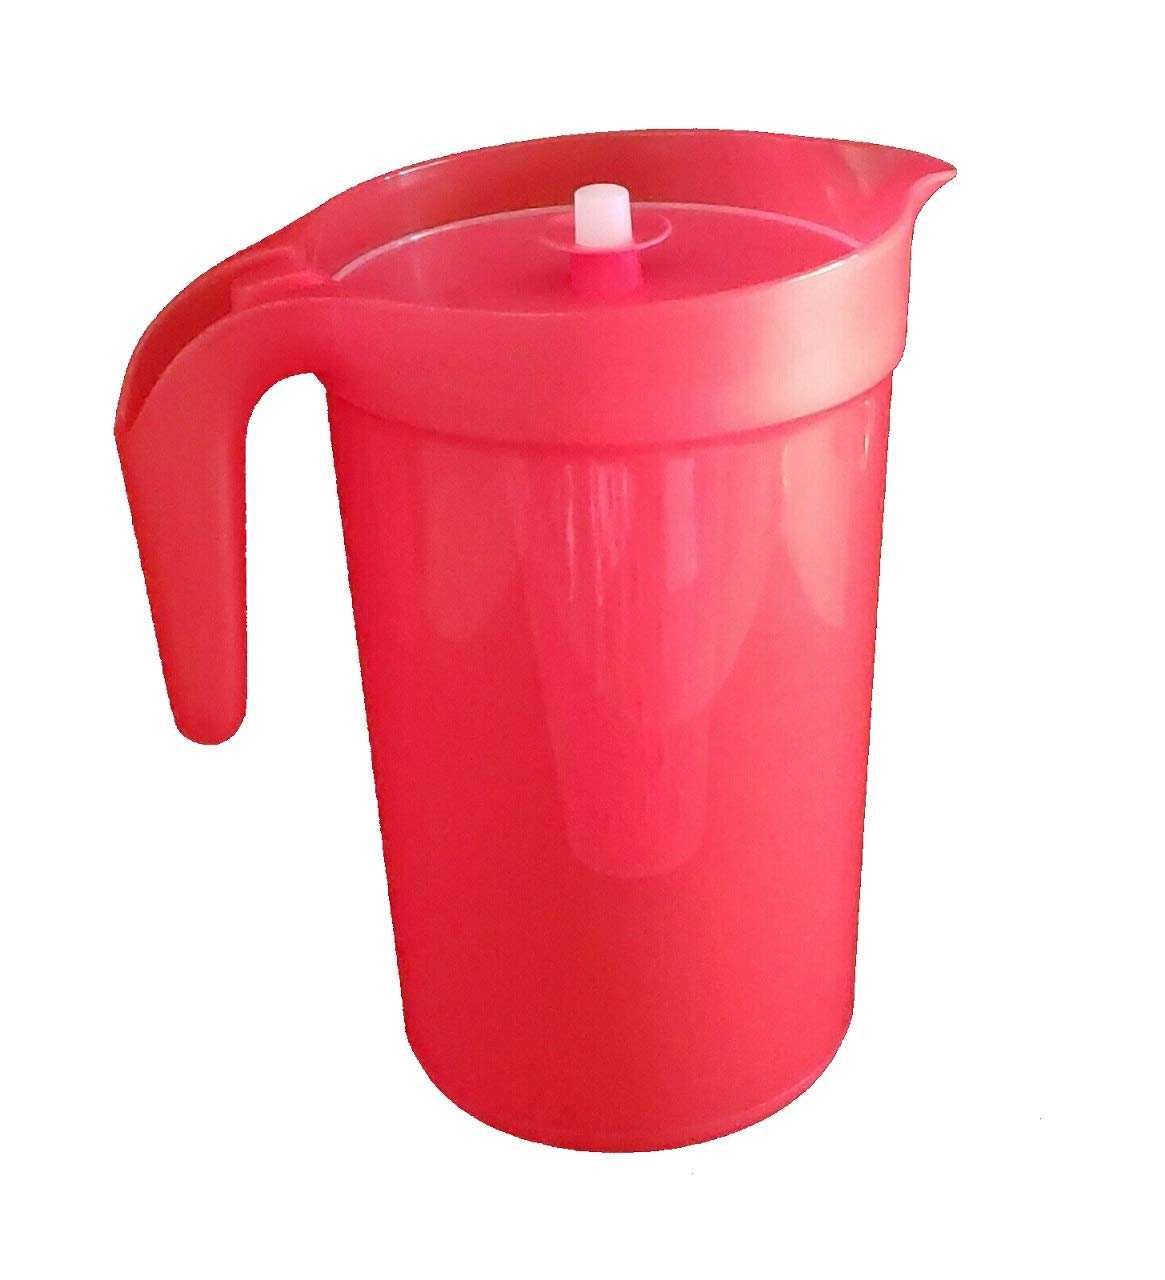 Tupperware 1 Gallon Pitcher with Infuser Emberglow Red